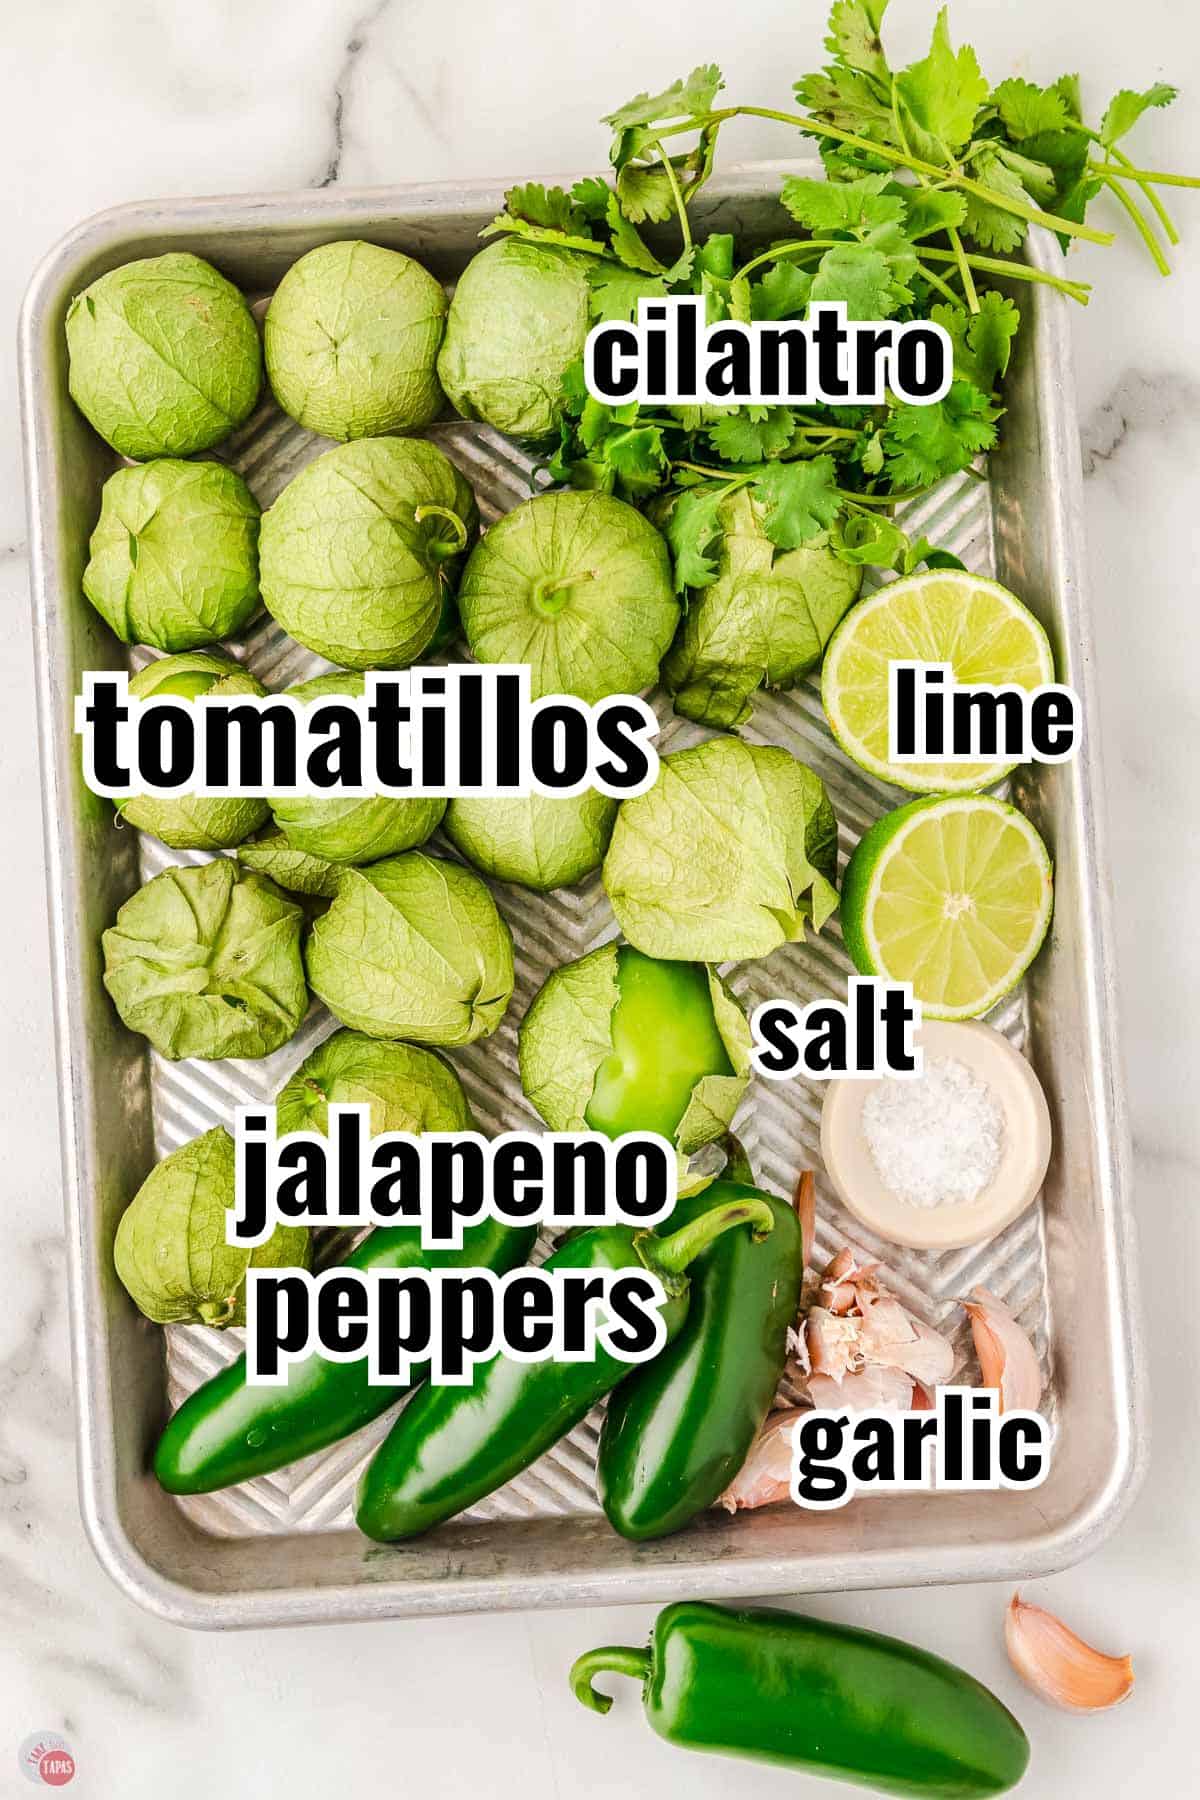 chile peppers, lemon juice, and green color tomatillos for salsa recipe